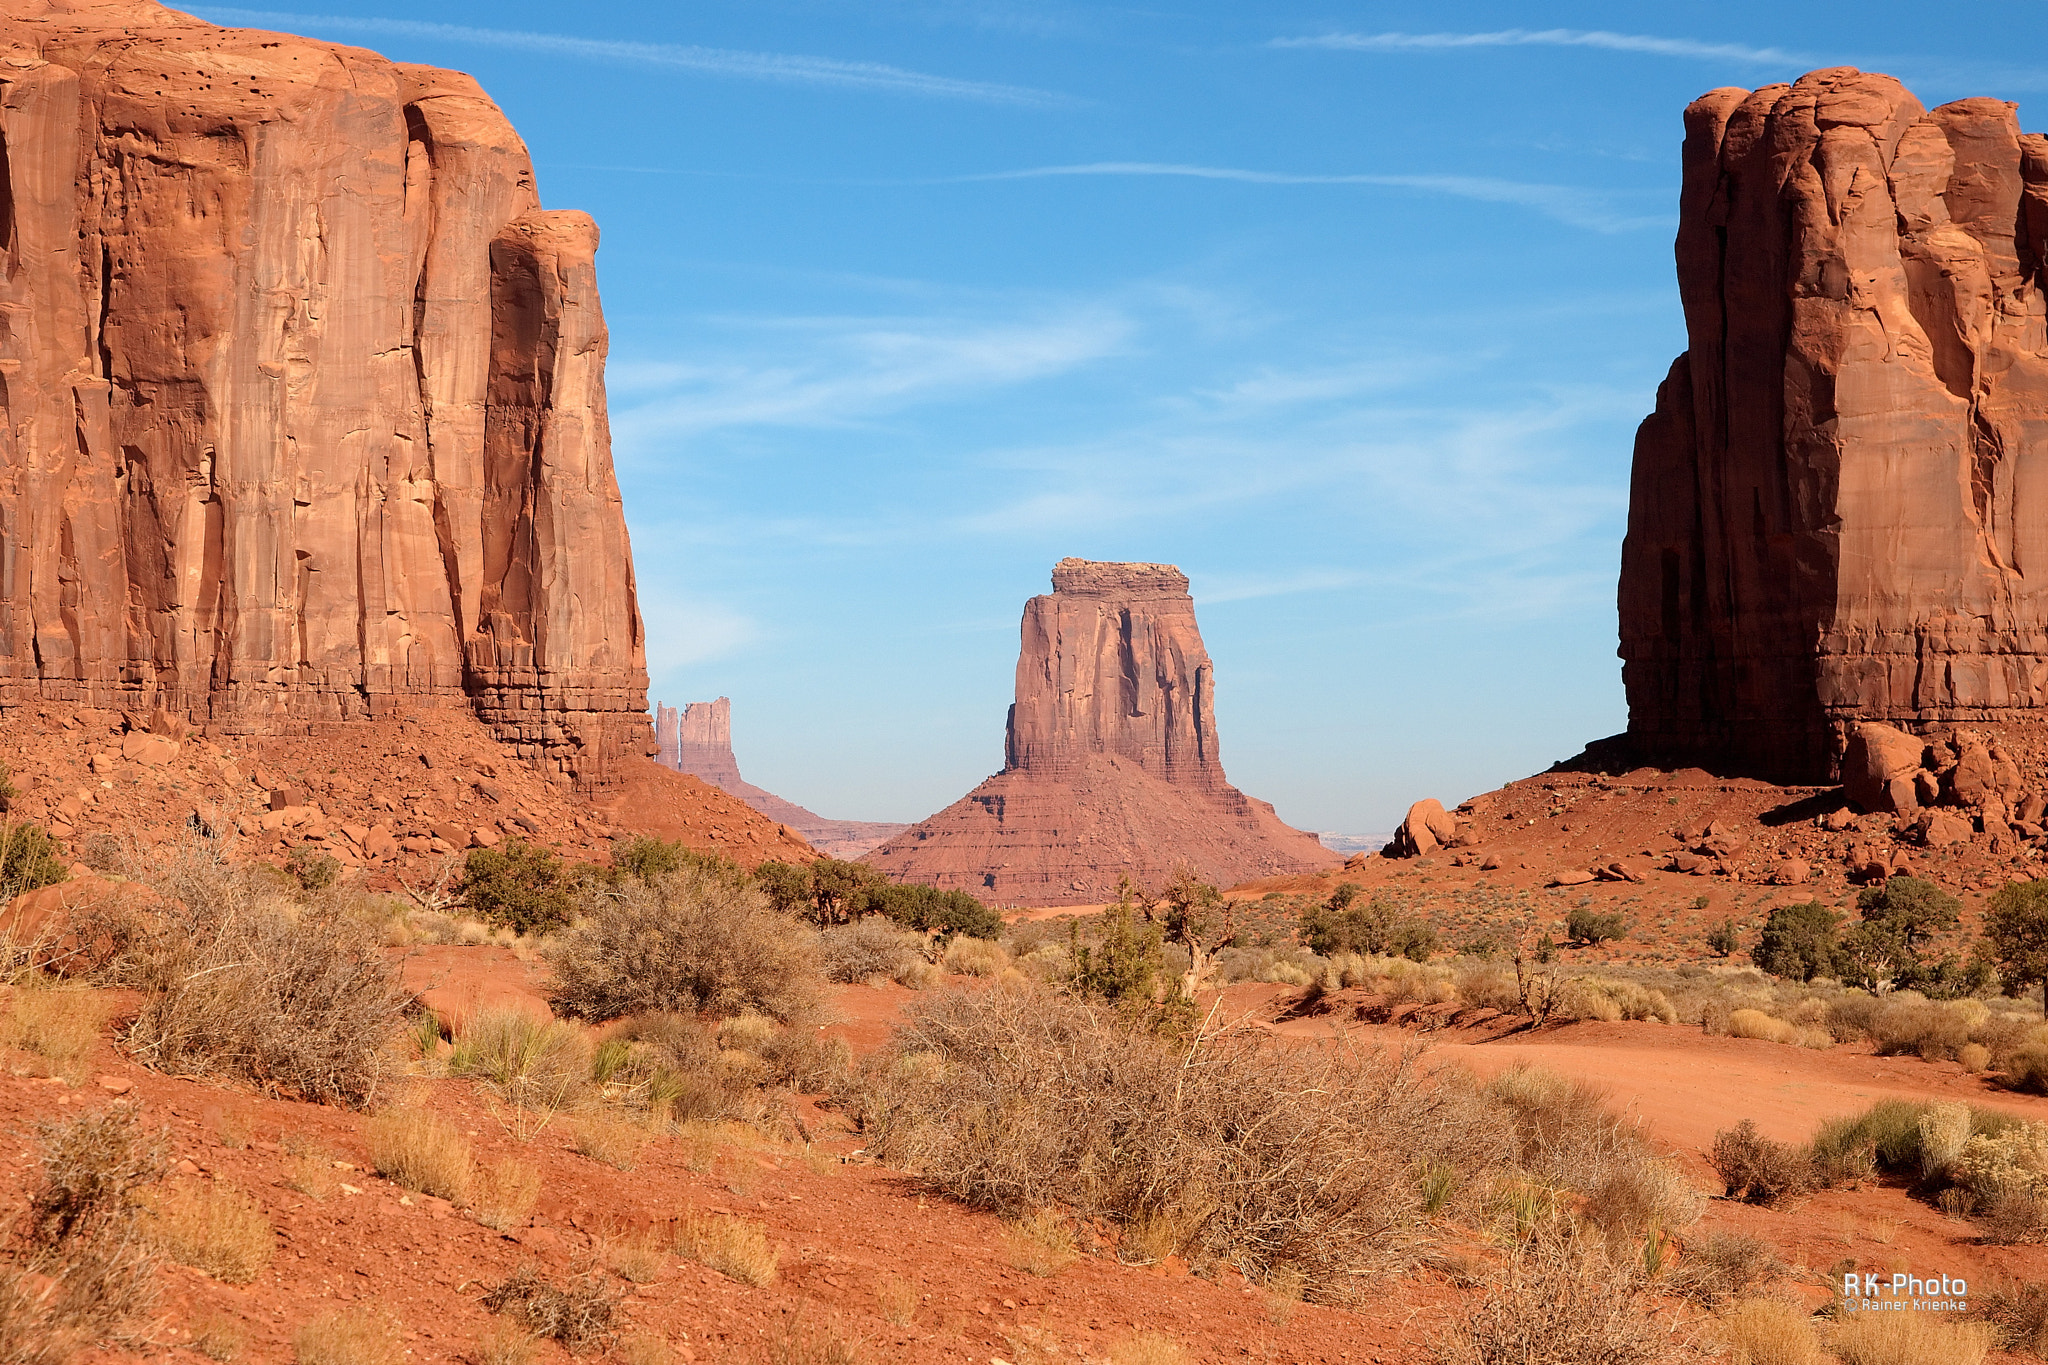 Nikon D80 + Tamron SP AF 17-50mm F2.8 XR Di II LD Aspherical (IF) sample photo. Monument valley photography